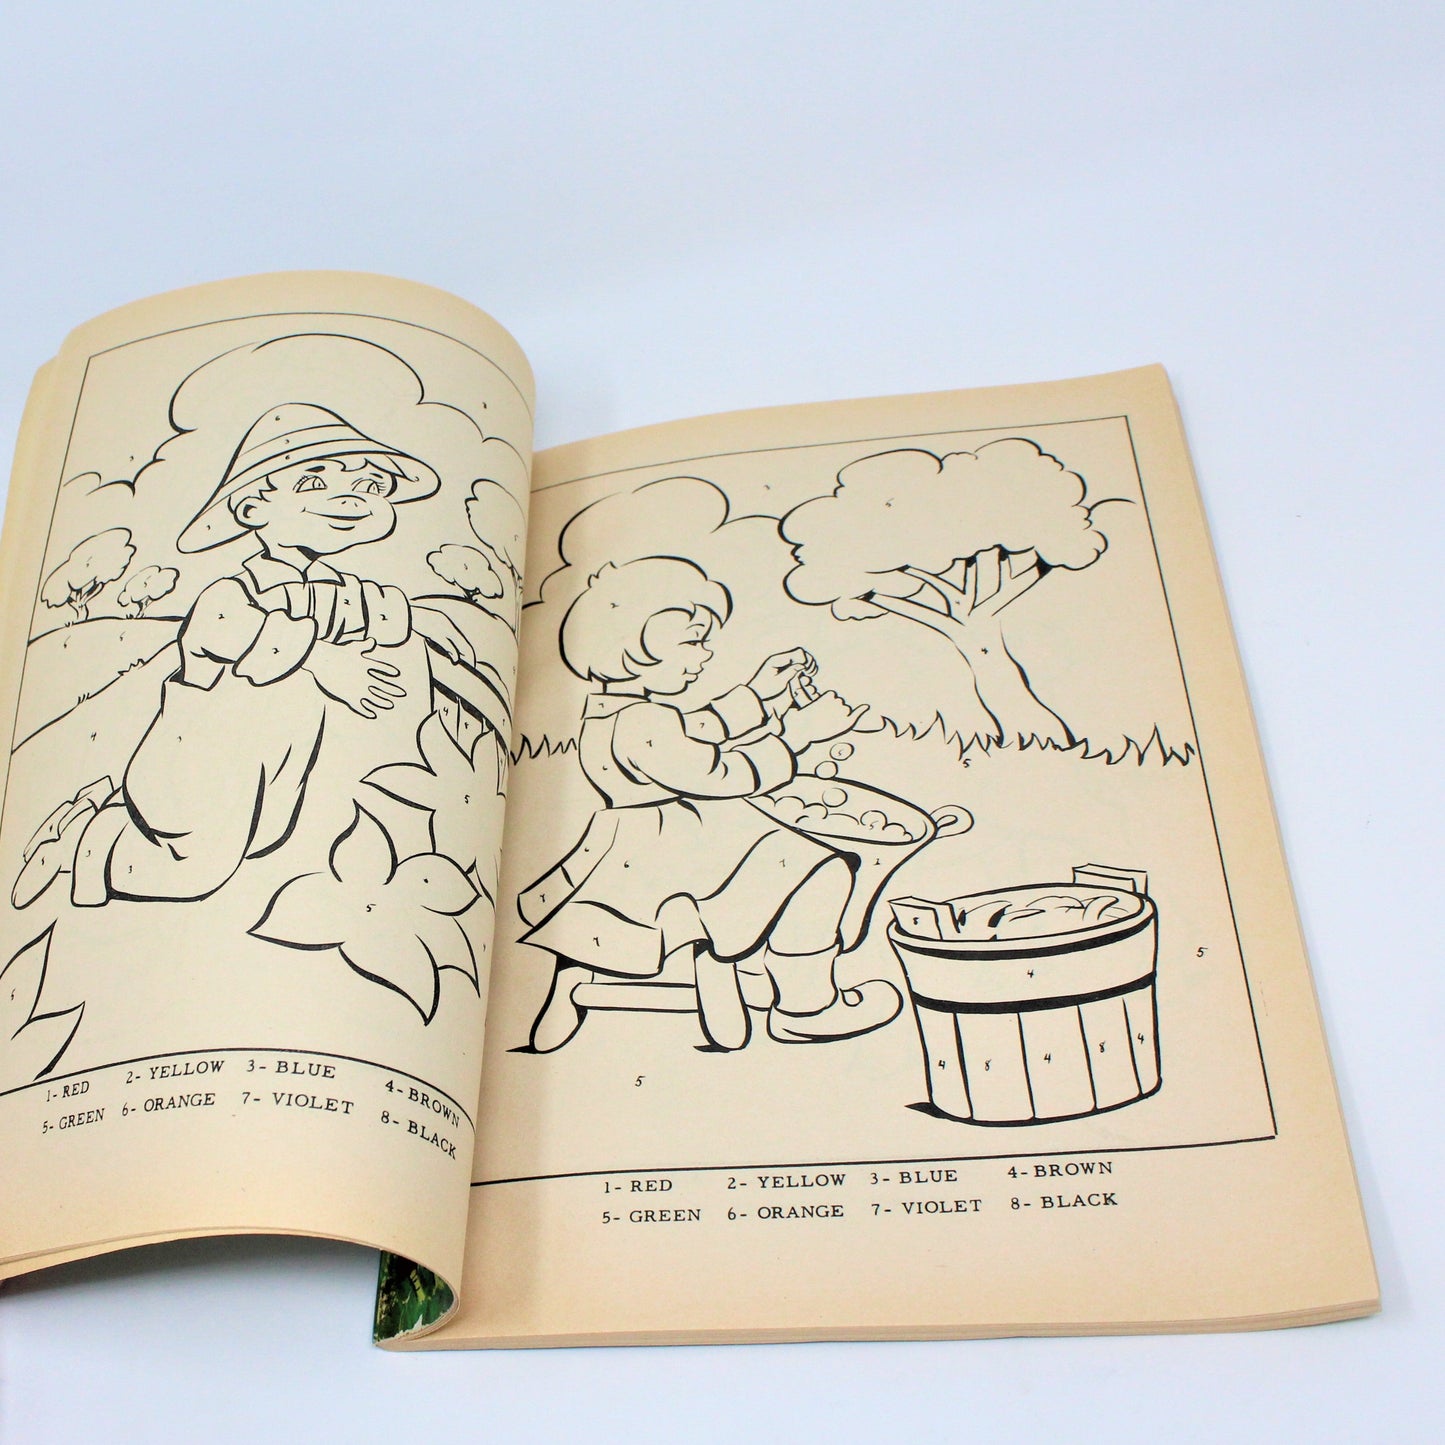 Coloring Book, Mac Donald's Farm, Color by Number, Clover Twinkle Books, Vintage